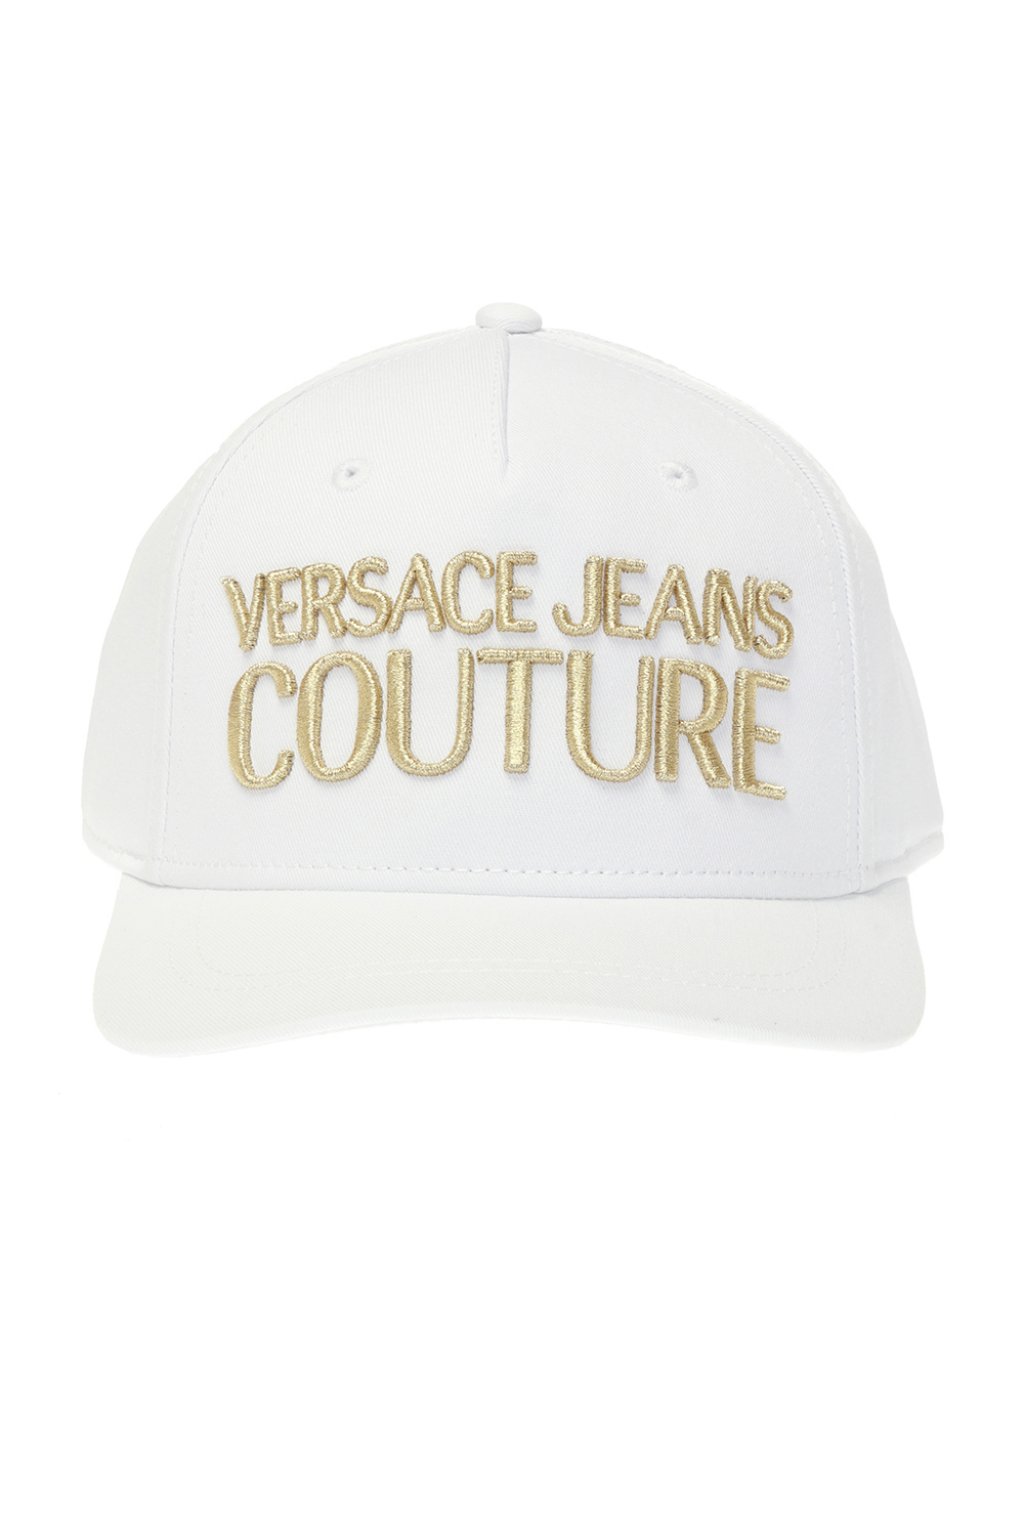 Versace Jeans Couture Baseball cap with logo | Men's Accessories | Vitkac